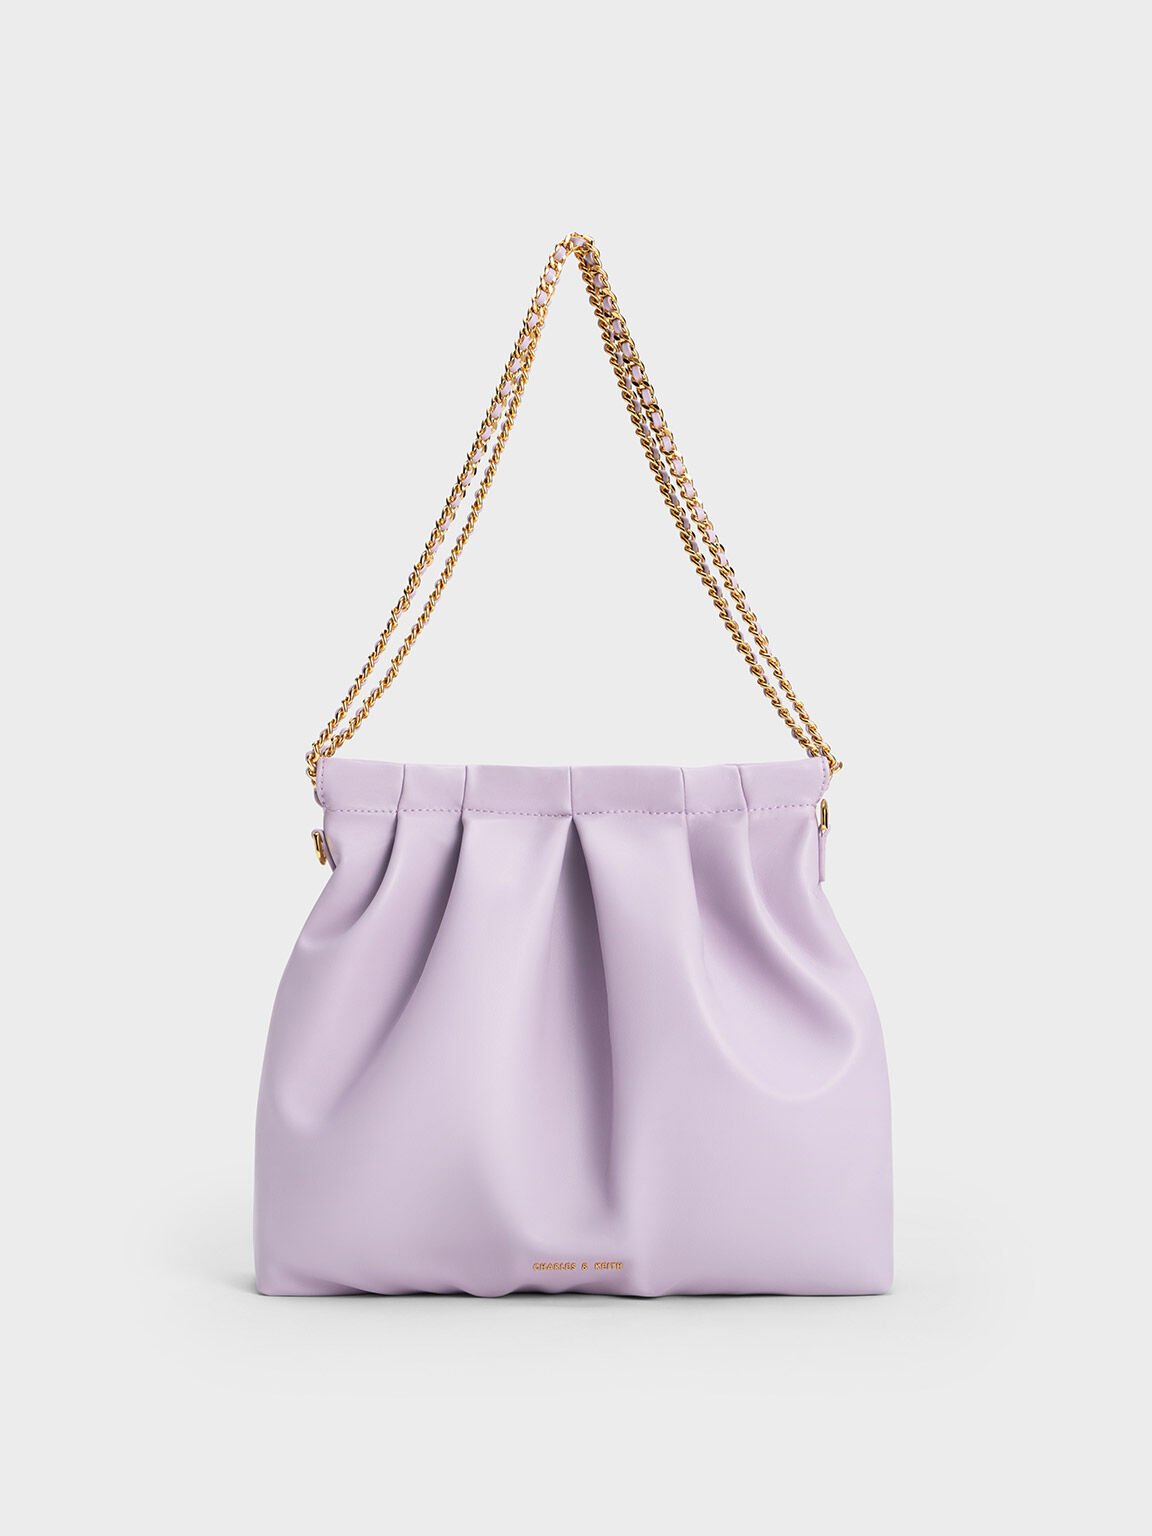 Duo Double Chain Hobo Bag, Lilac, hi-res